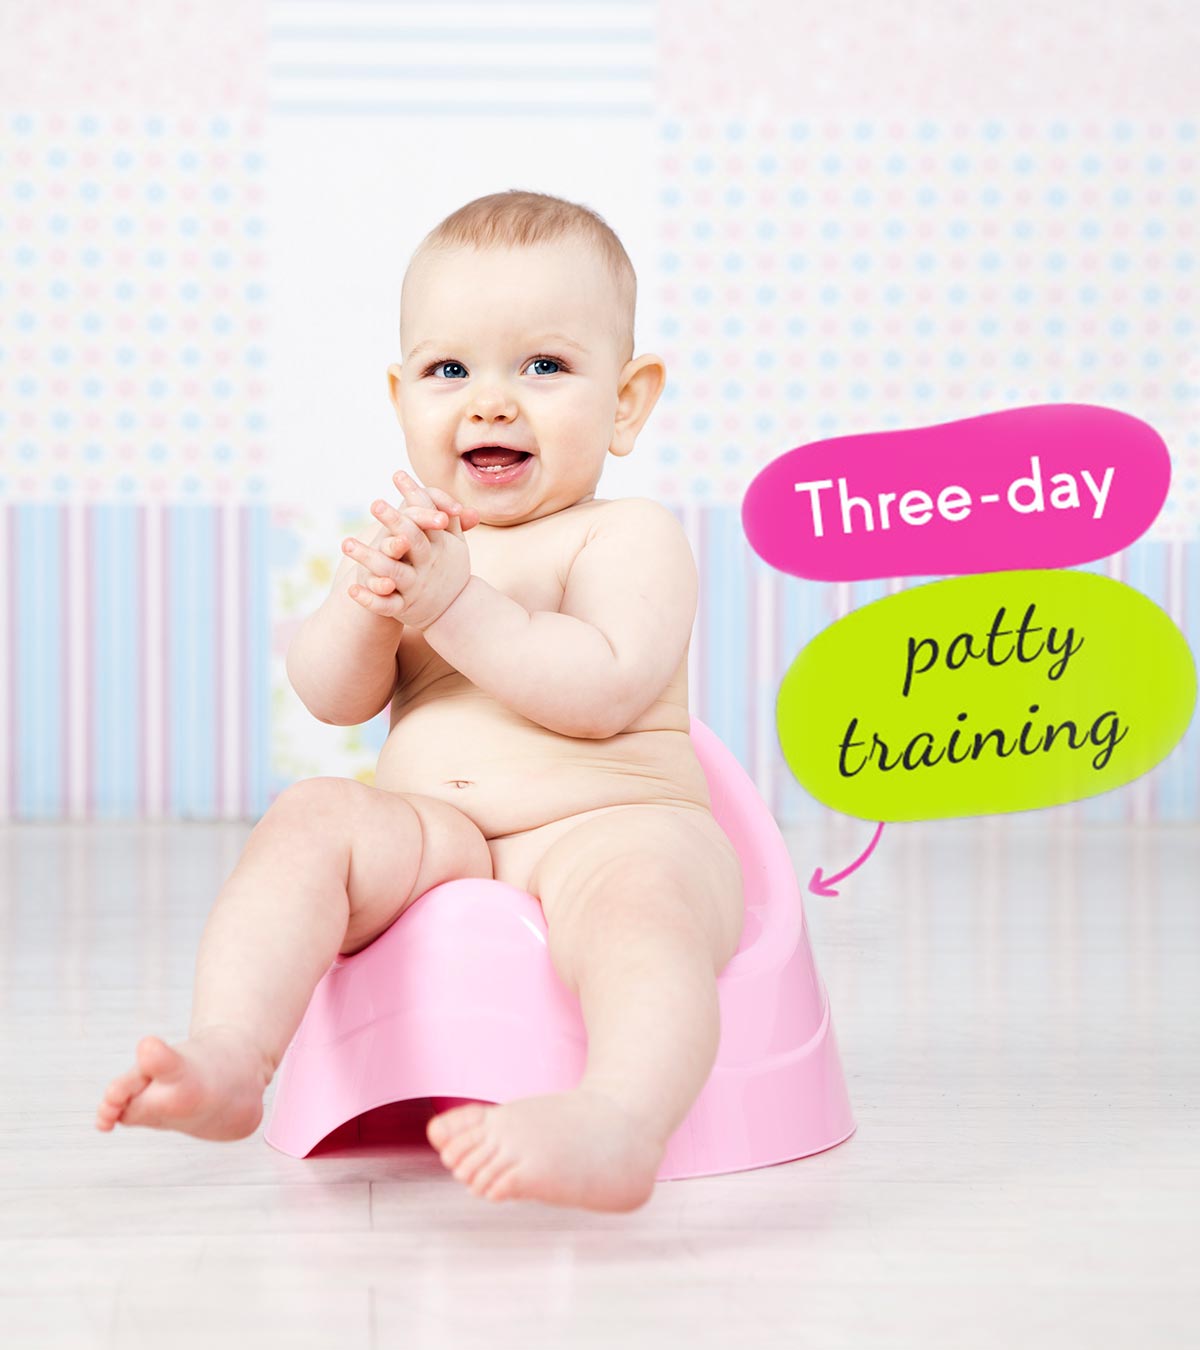 3-Day Potty Training: How It Works And Steps To Prepare